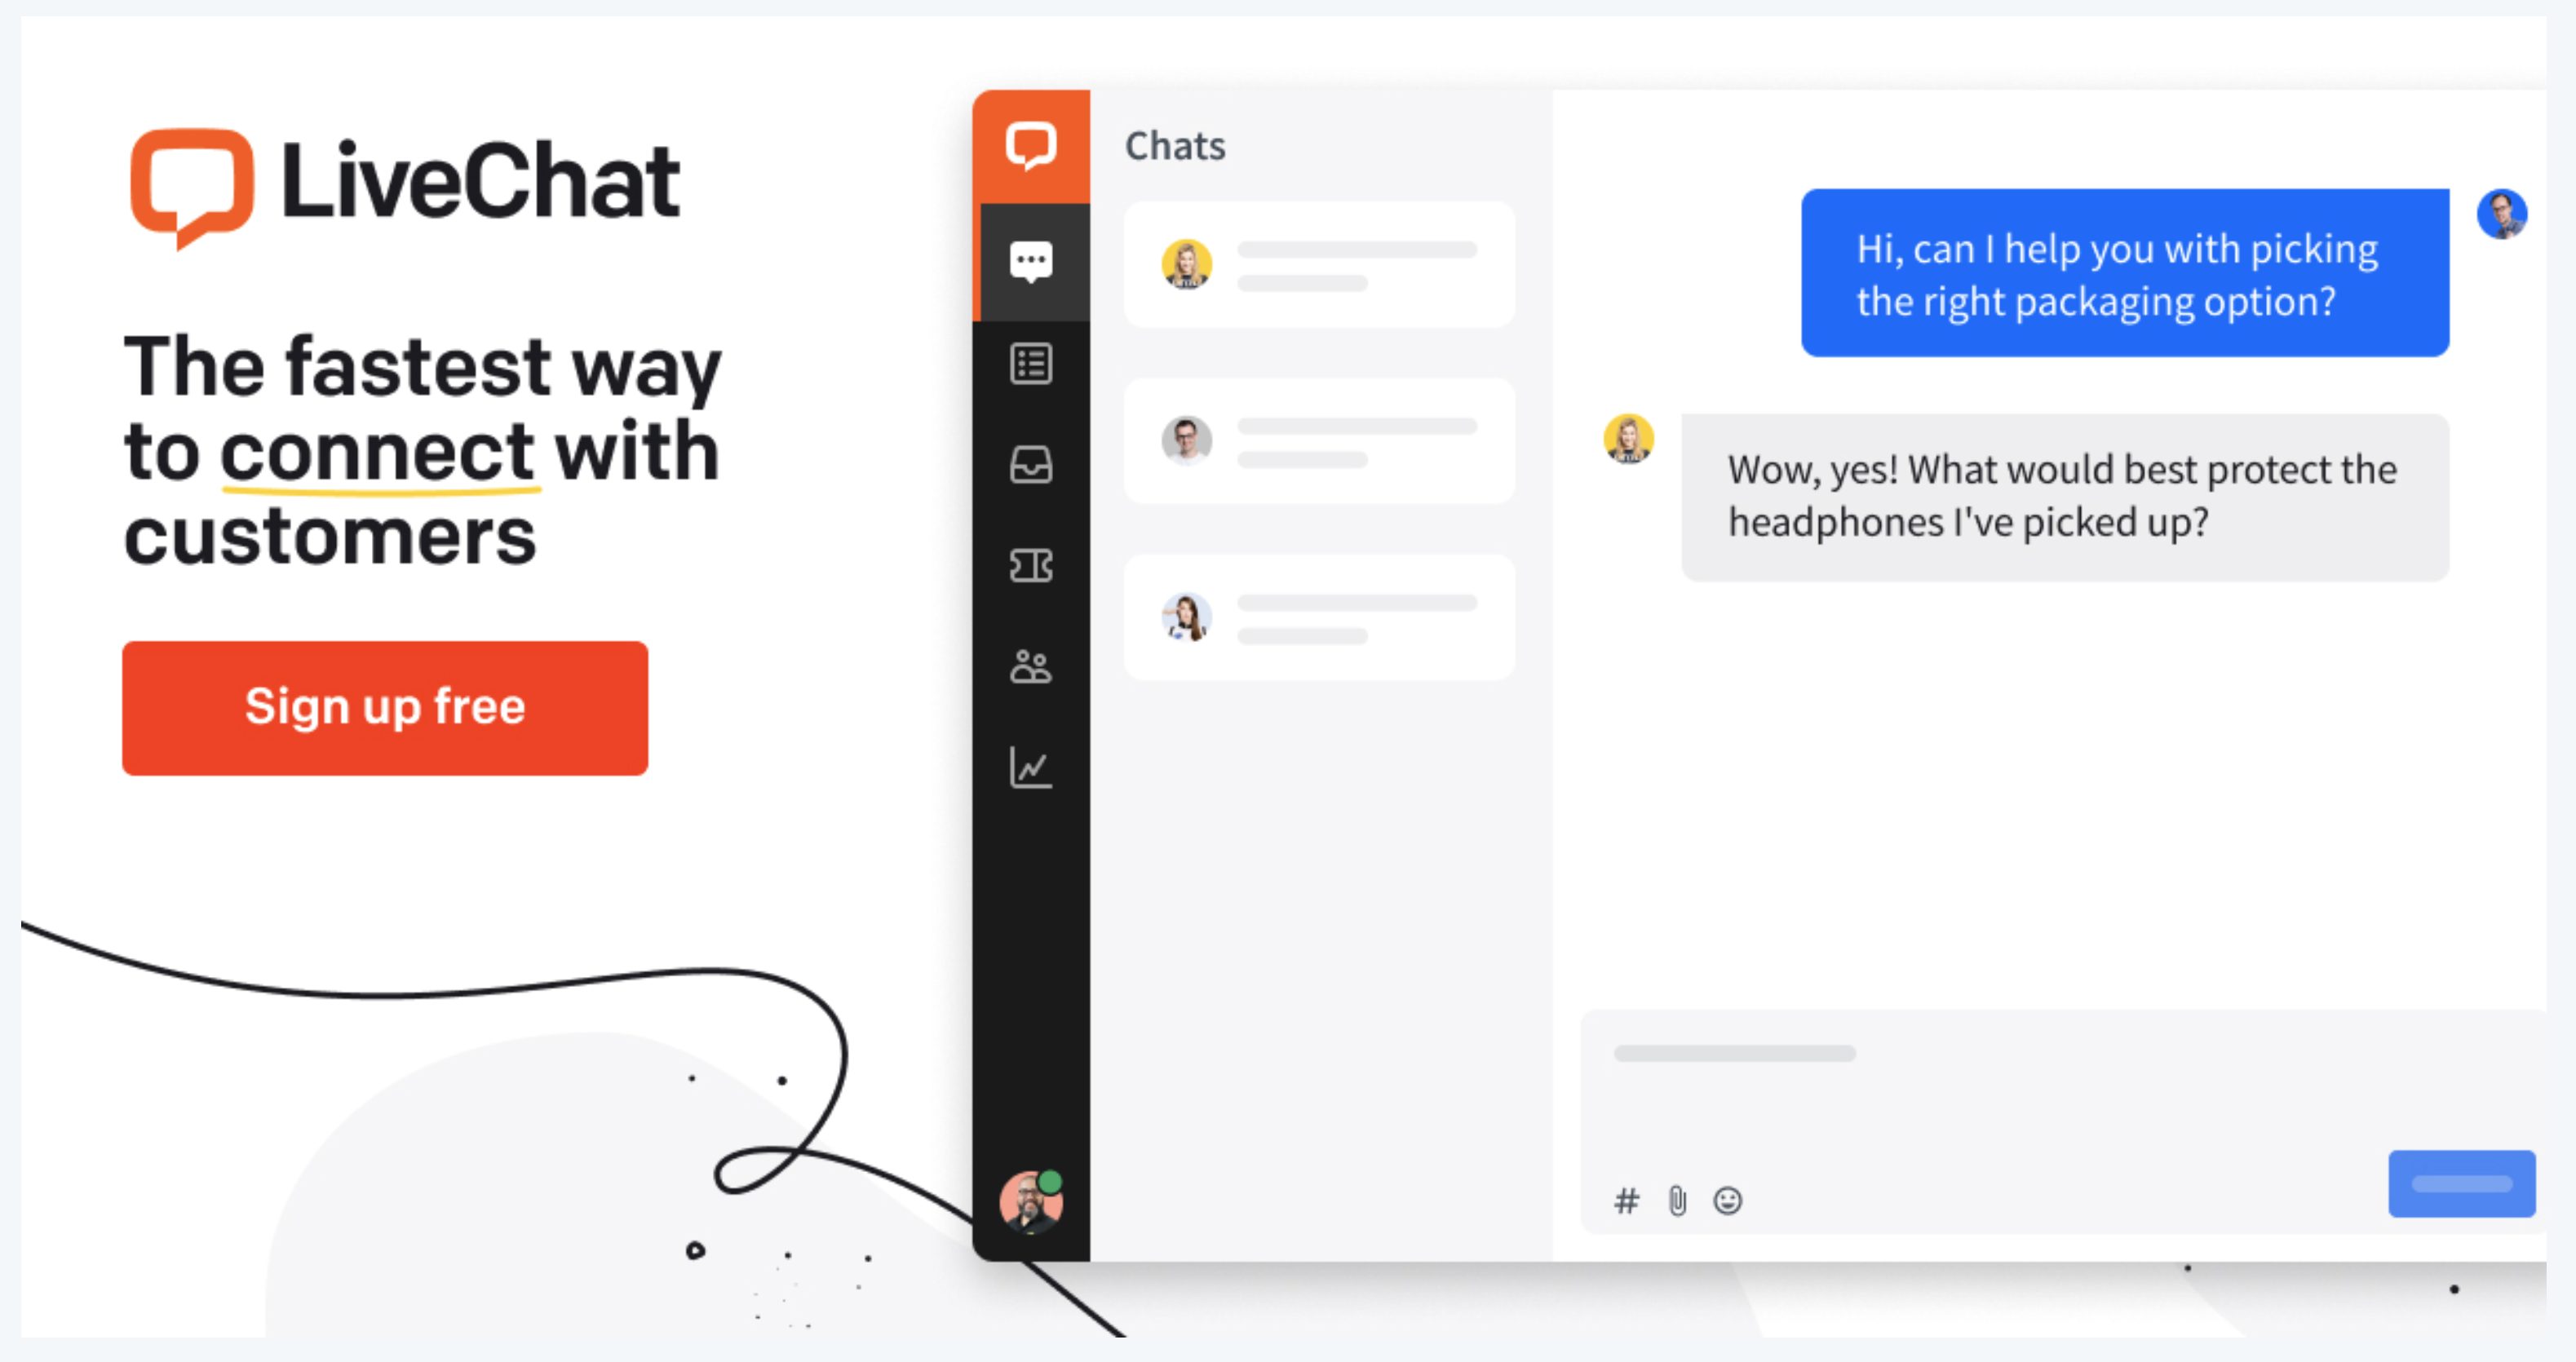 New marketing assets for LiveChat and ChatBot